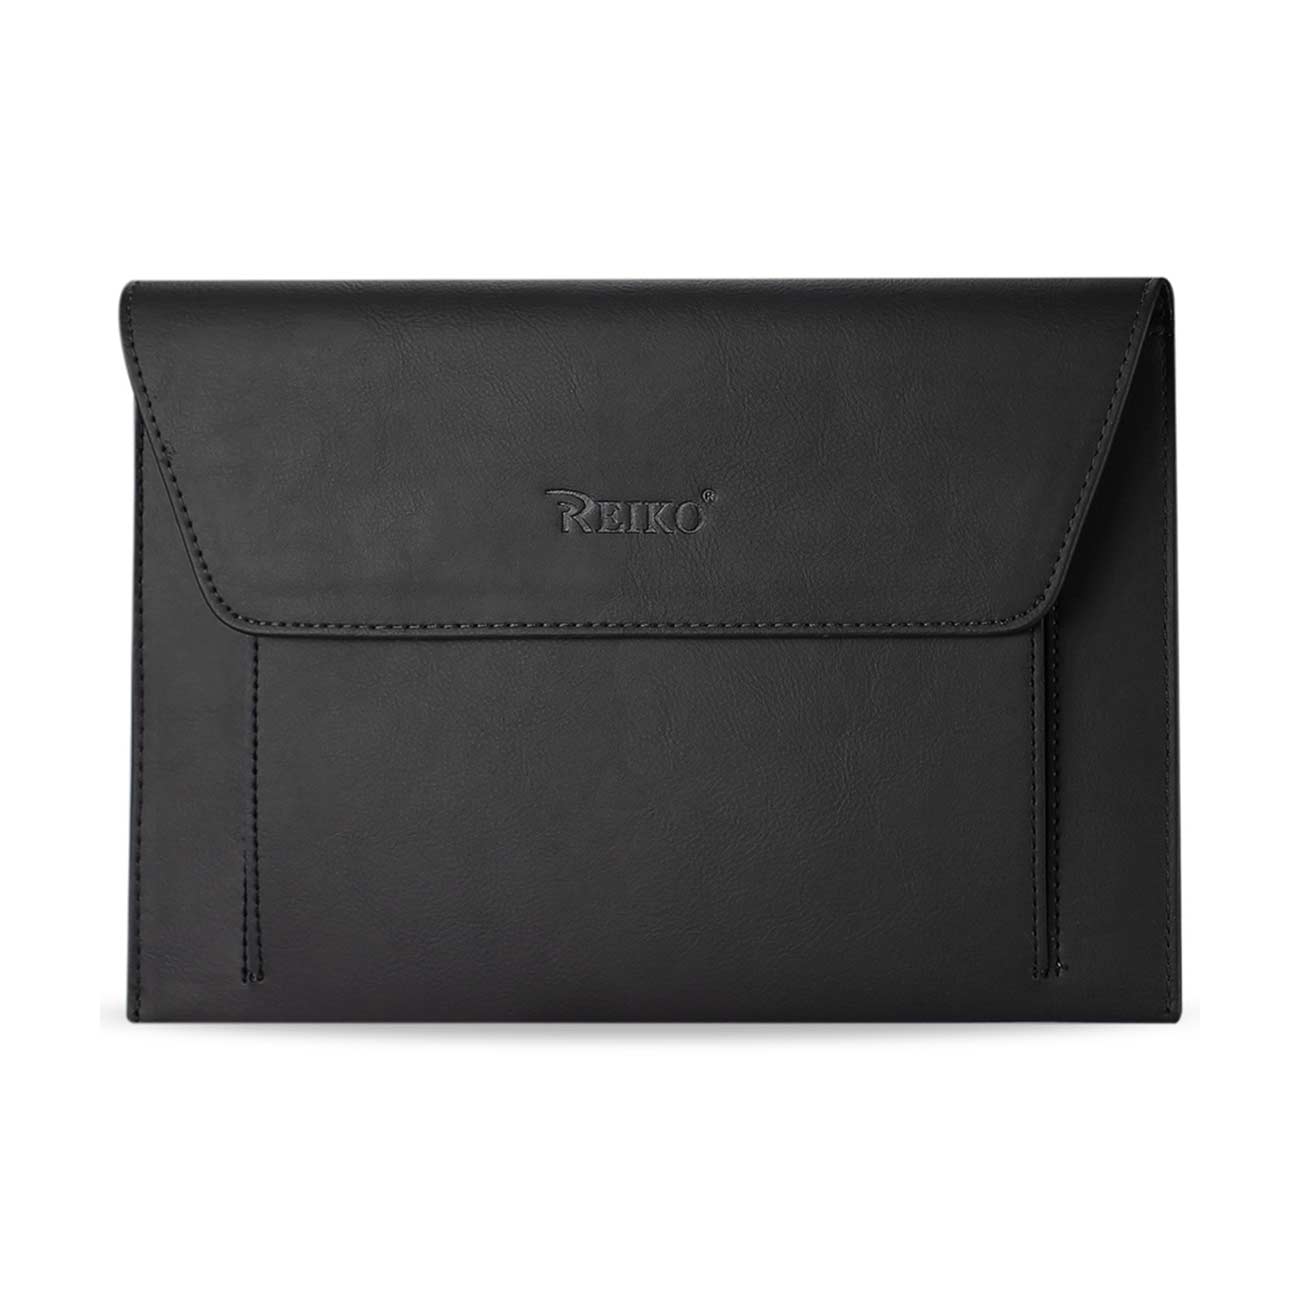 REIKO PREMIUM LEATHER CASE POUCH FOR 8.2INCHES IPADS AND TABLETS In BLACK